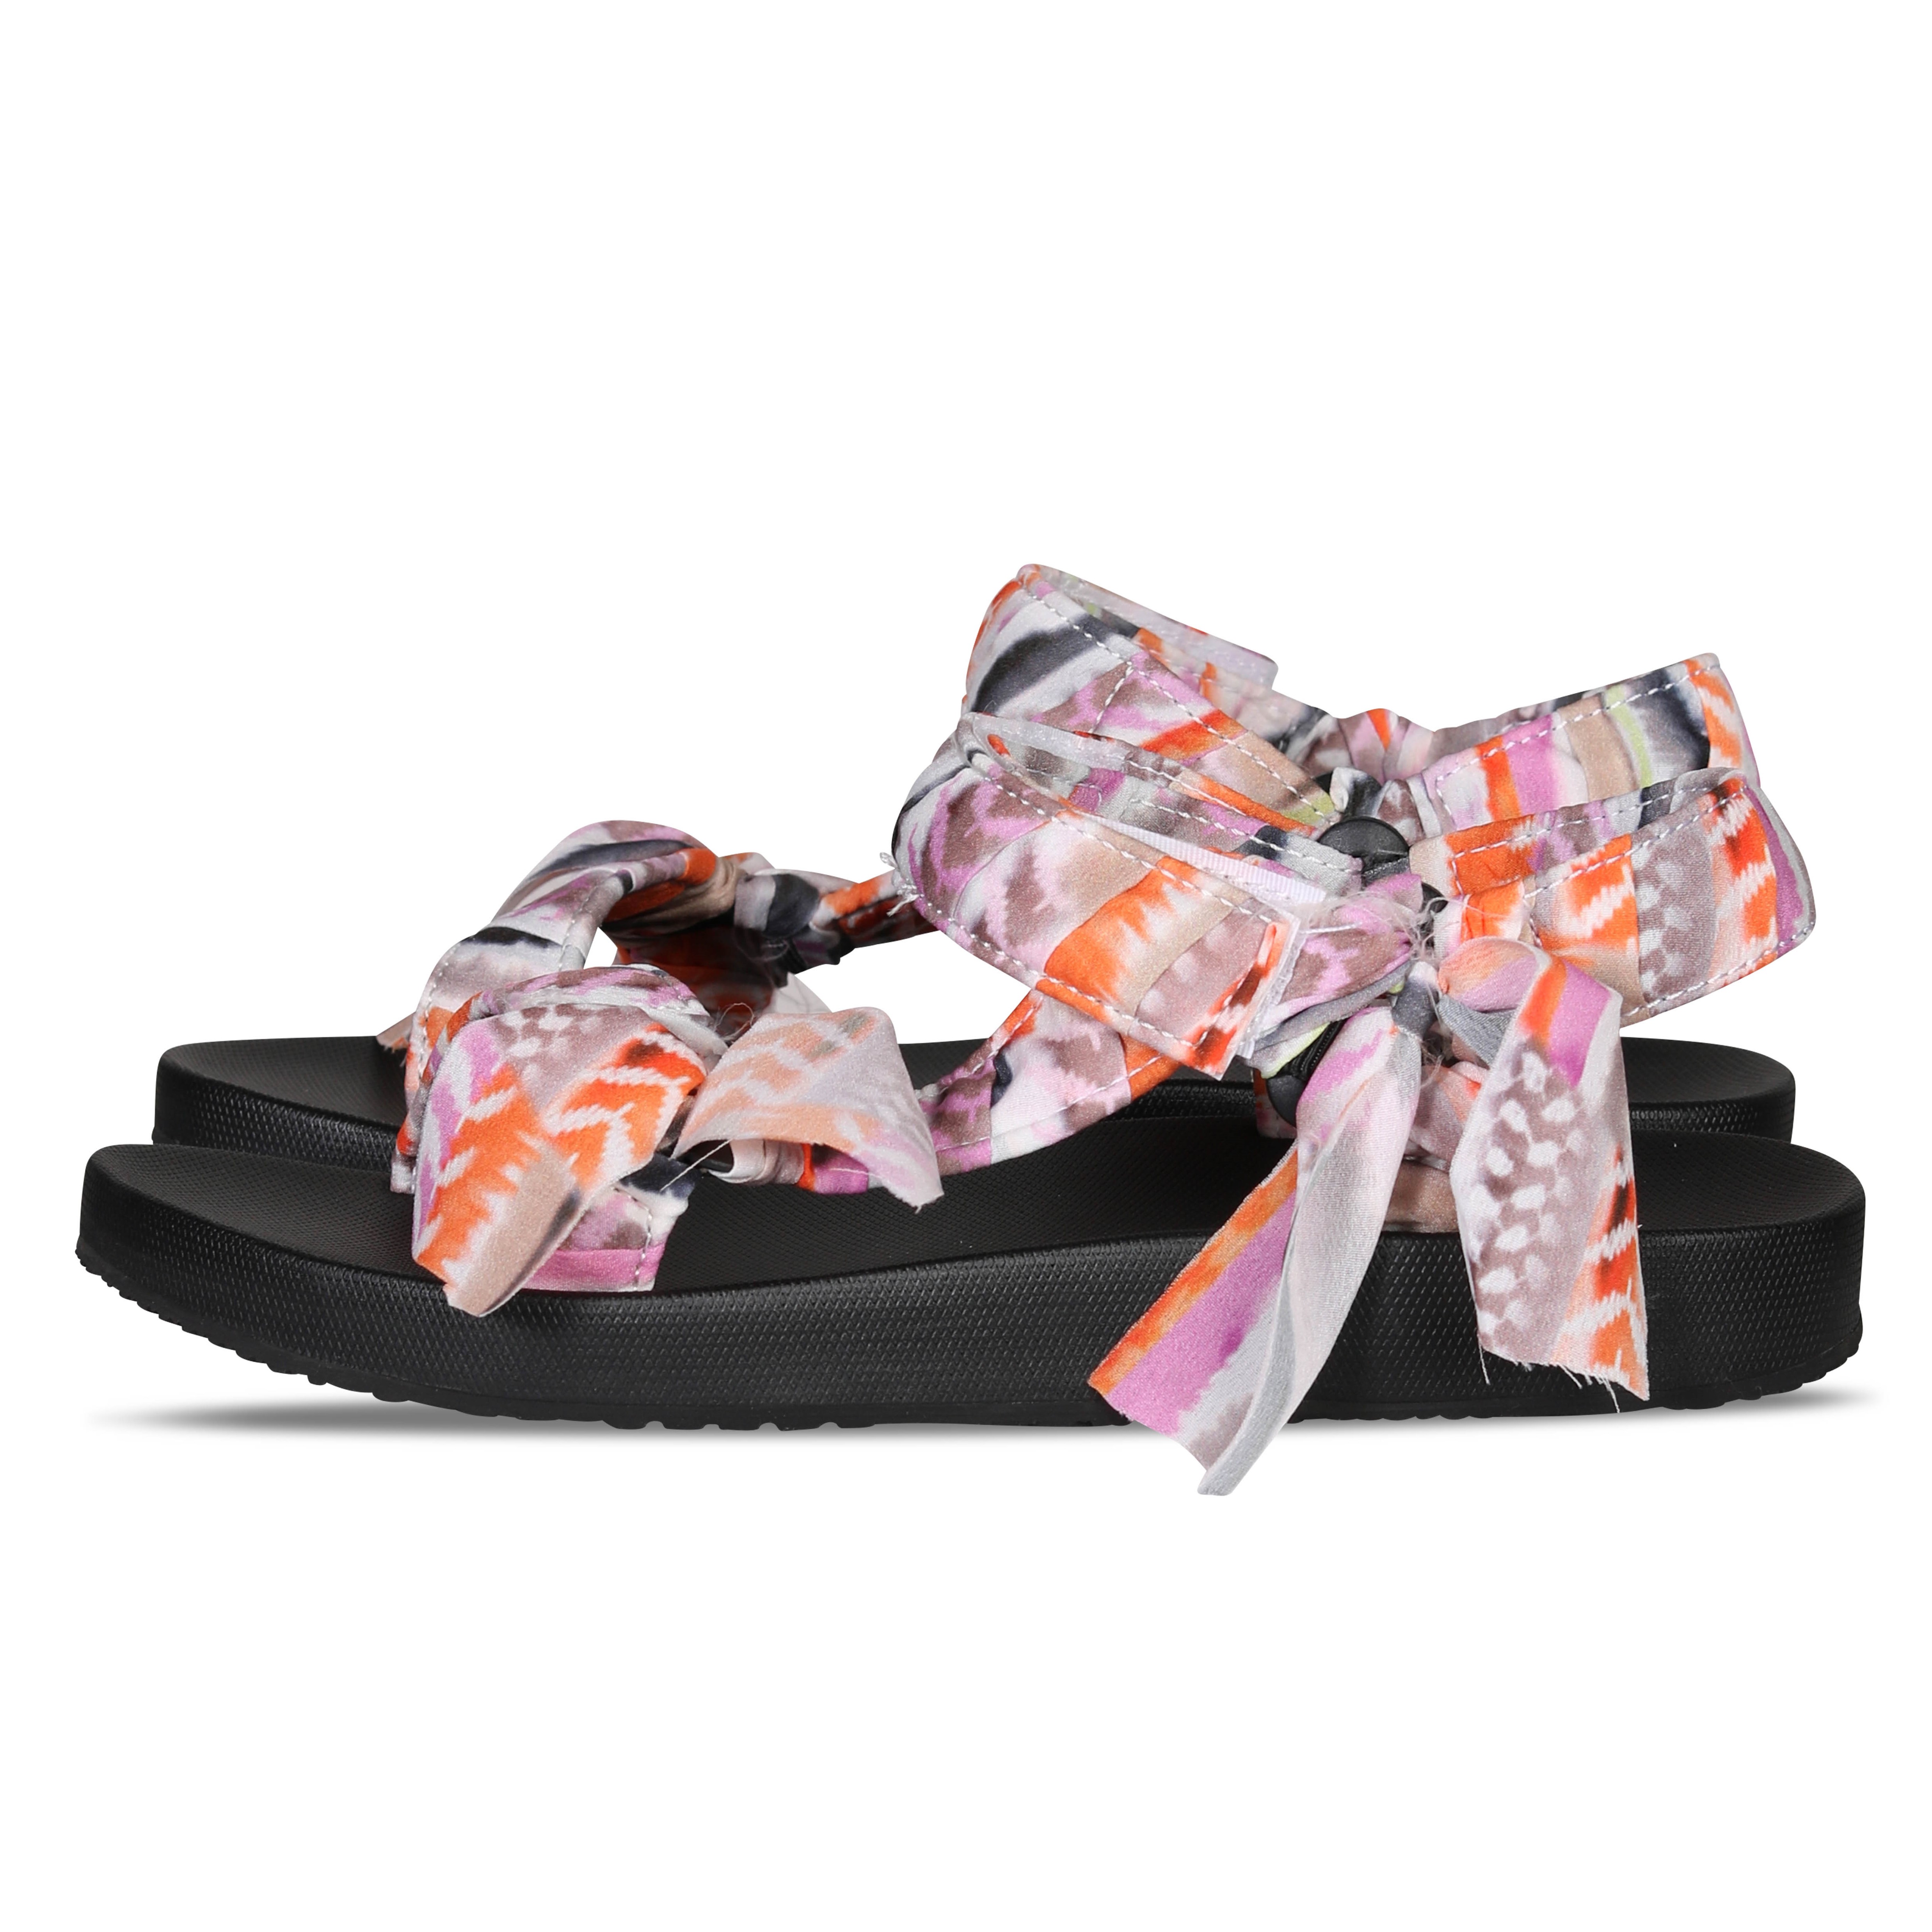 Lala Berlin Tied Sandals Asger in Horizontal Sunset